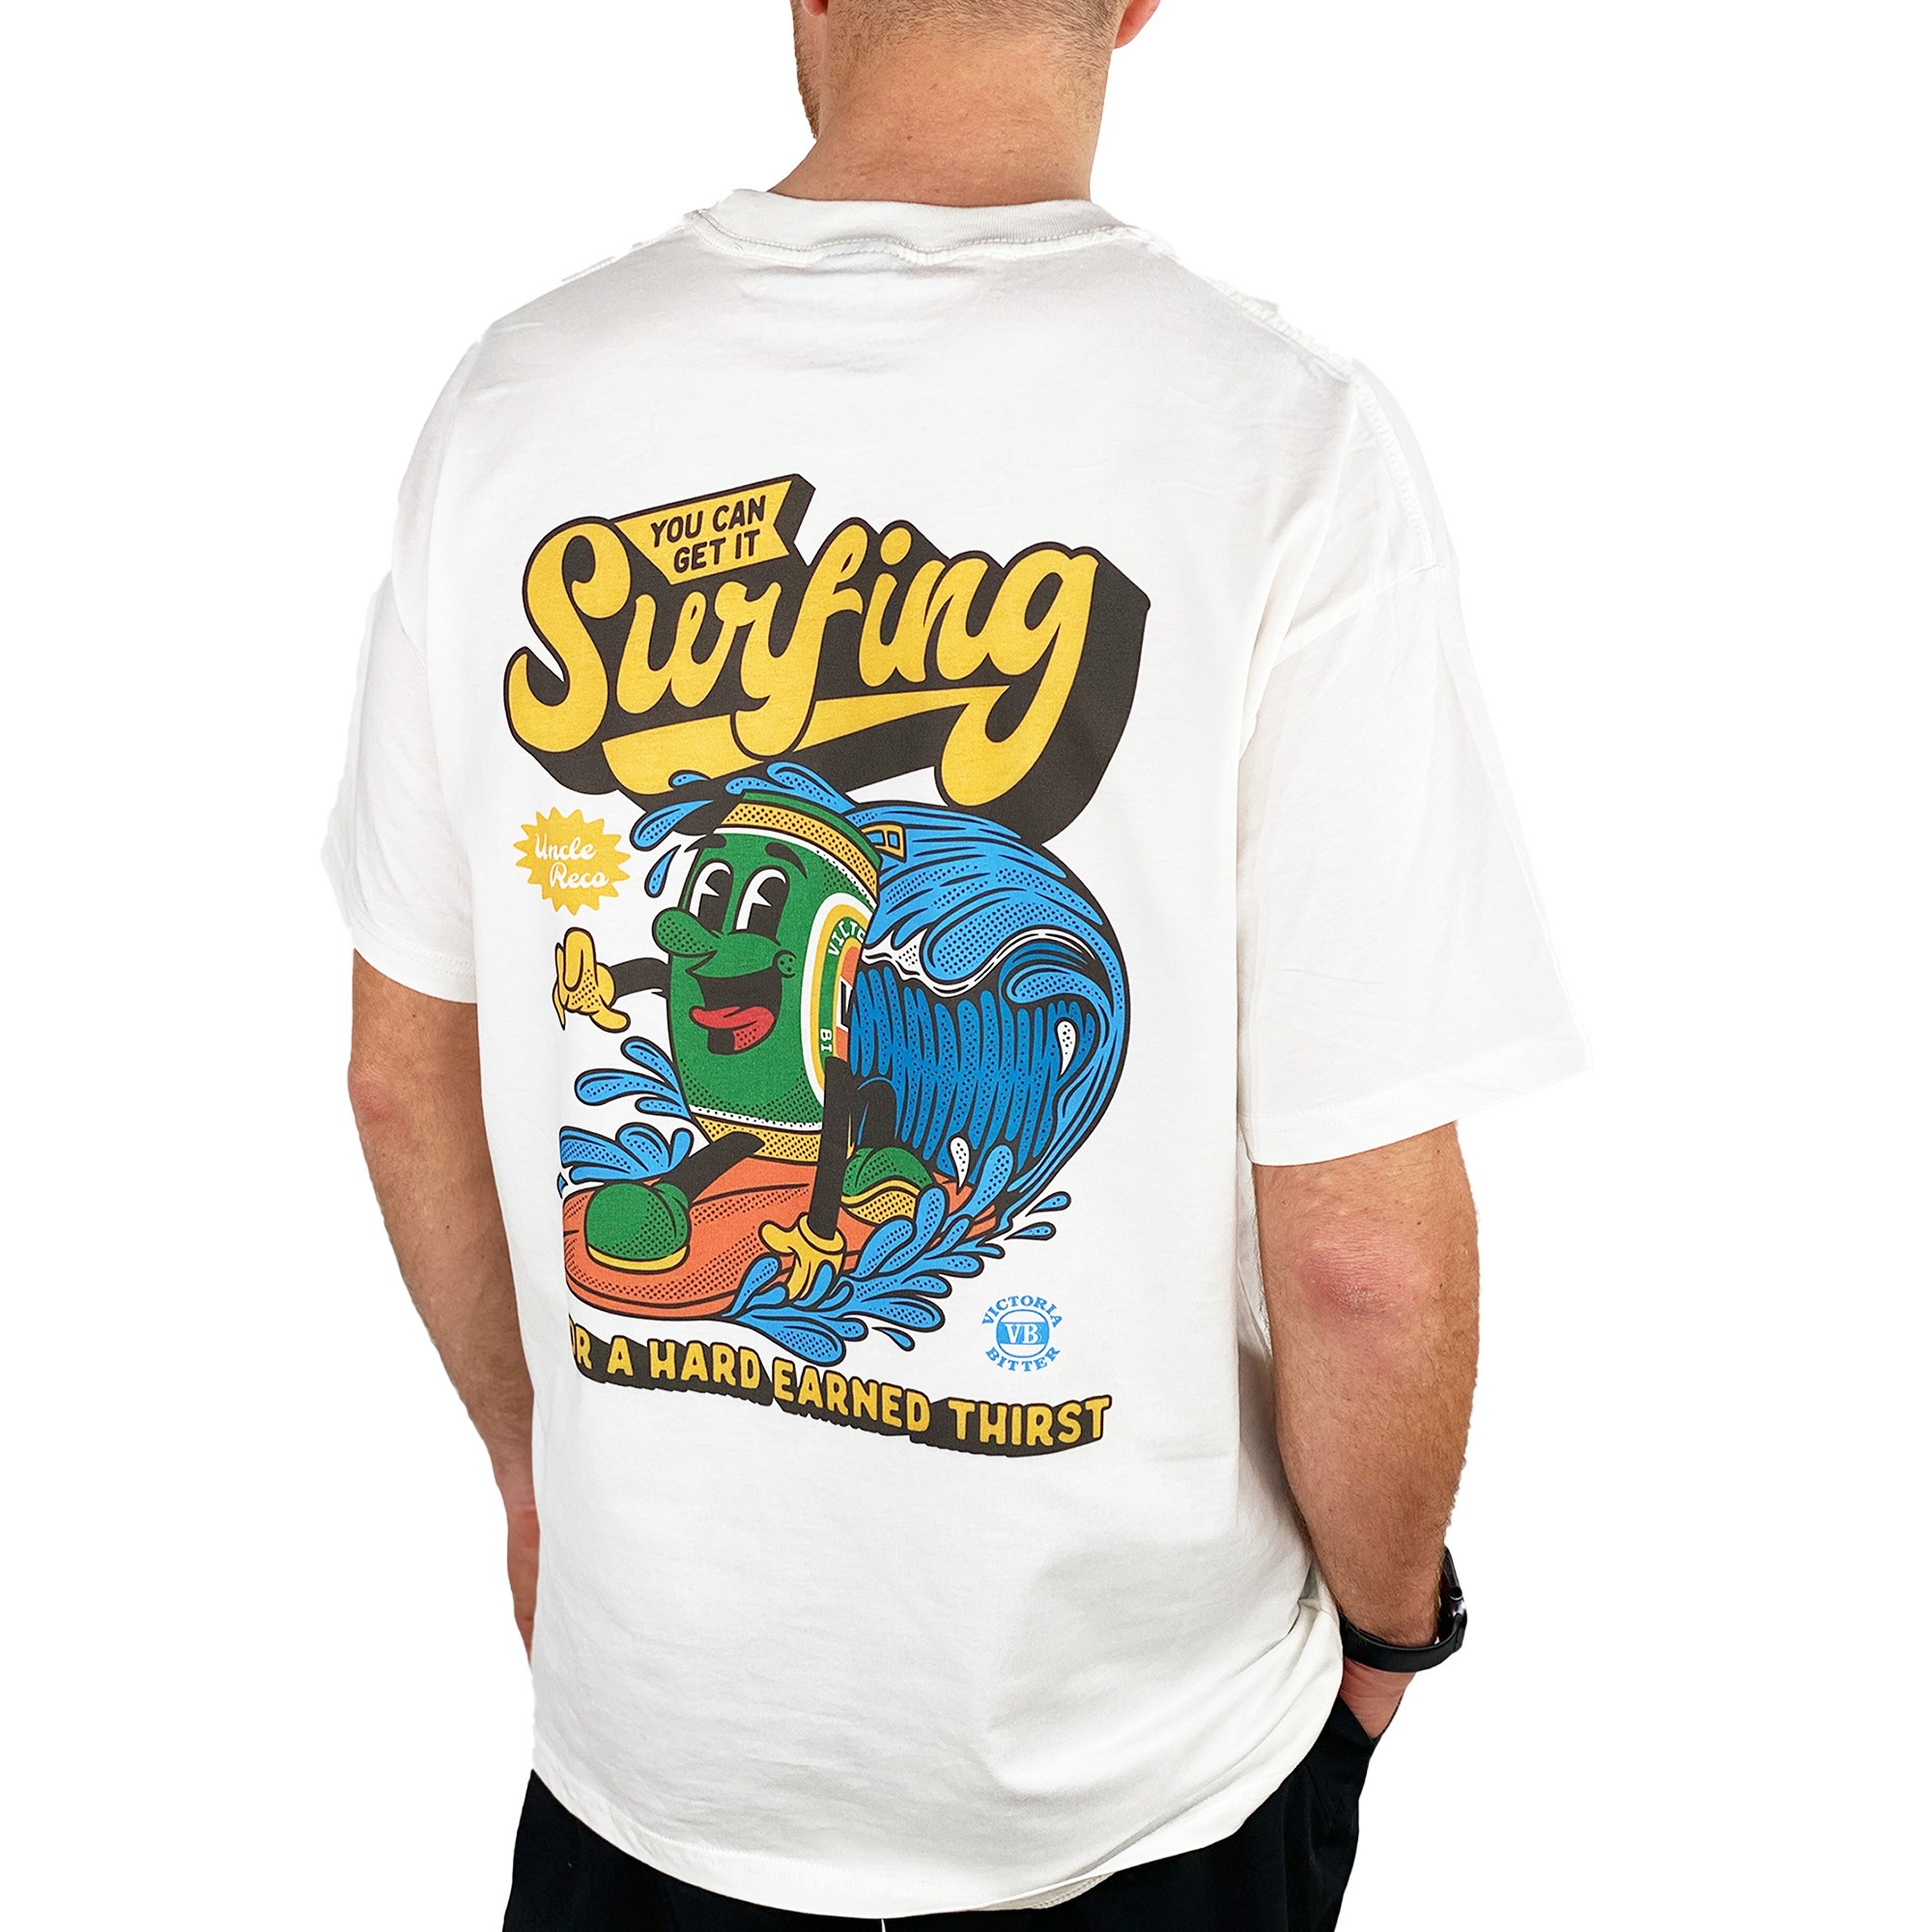 GET IT SURFING FRONT AND BACK VINTAGE TEE